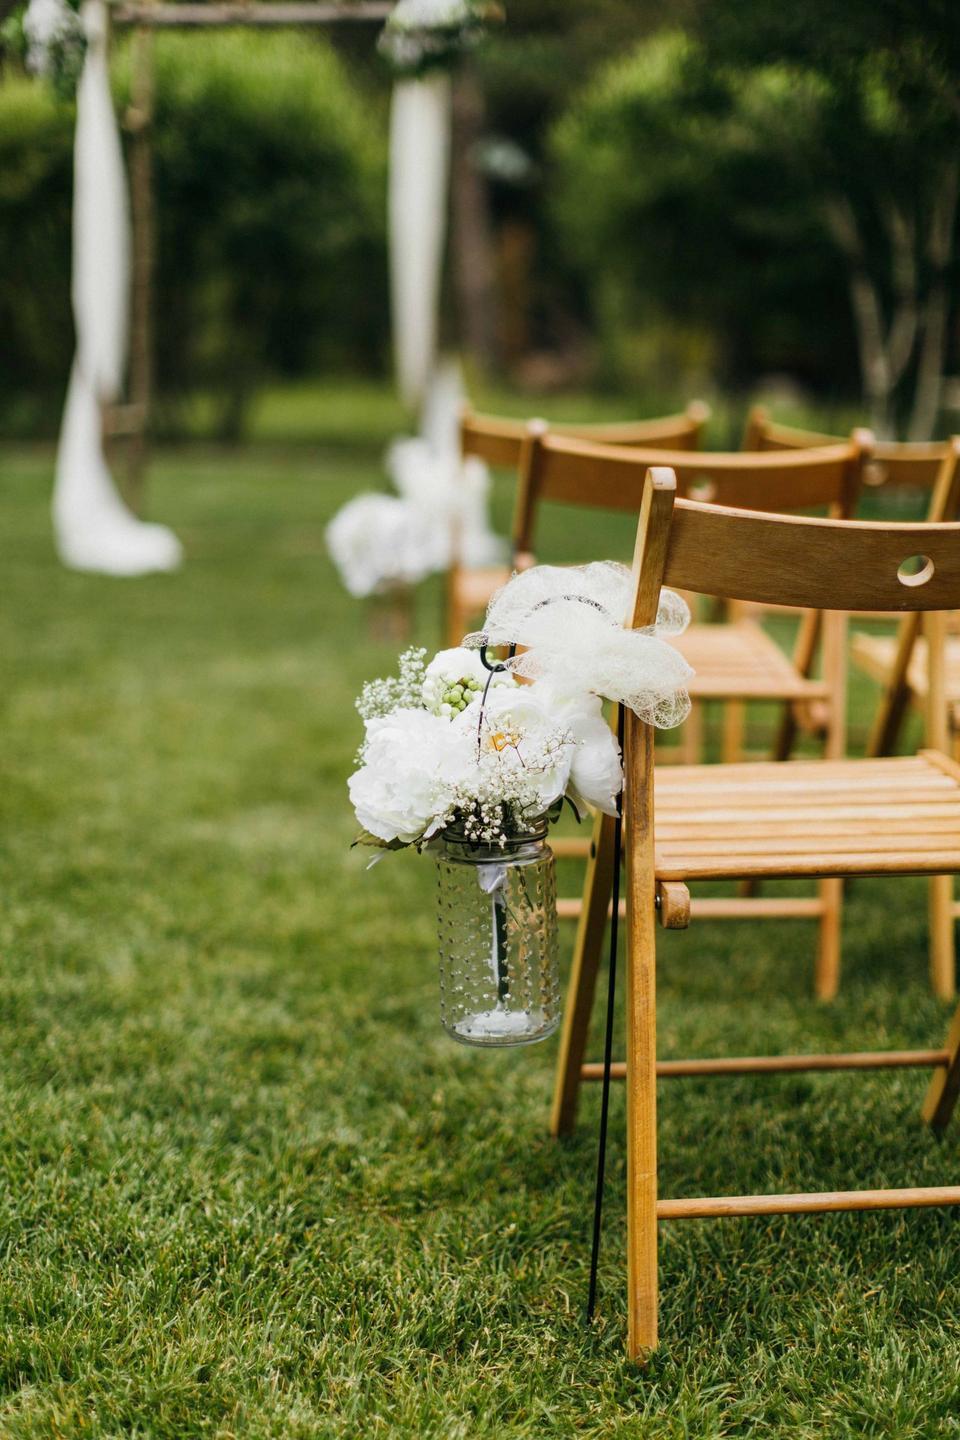 simple outdoor wedding aisle decor idea glass hobnail jar with white flowers and baby's breath displayed on small shepherd's hook